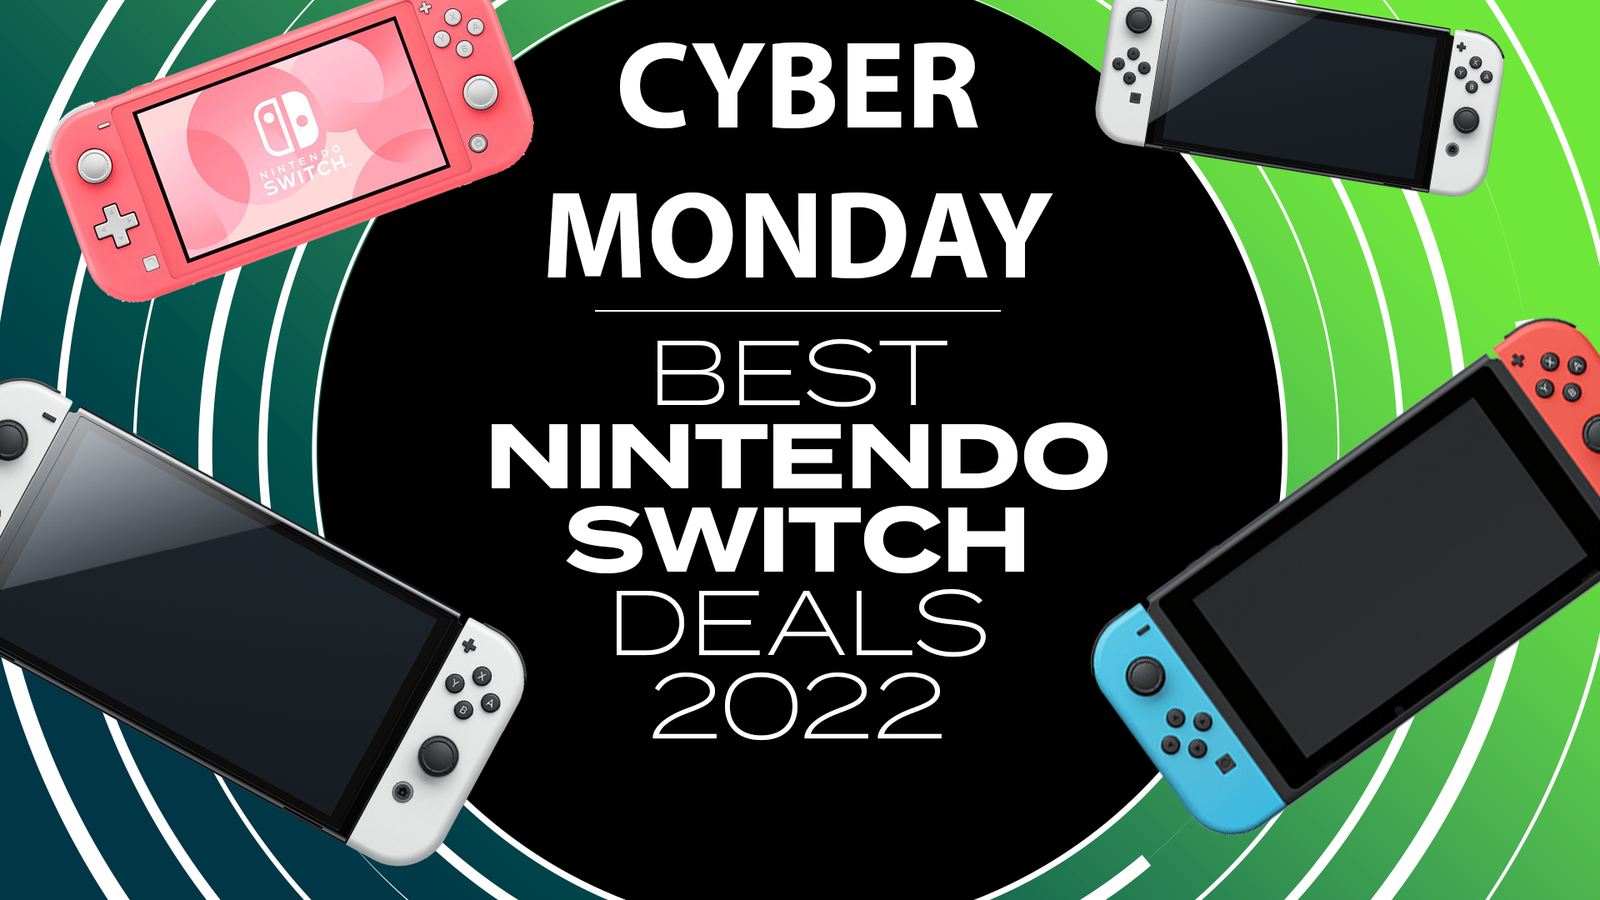 Best Nintendo Switch OLED Black Friday & Cyber Monday Deals (2023